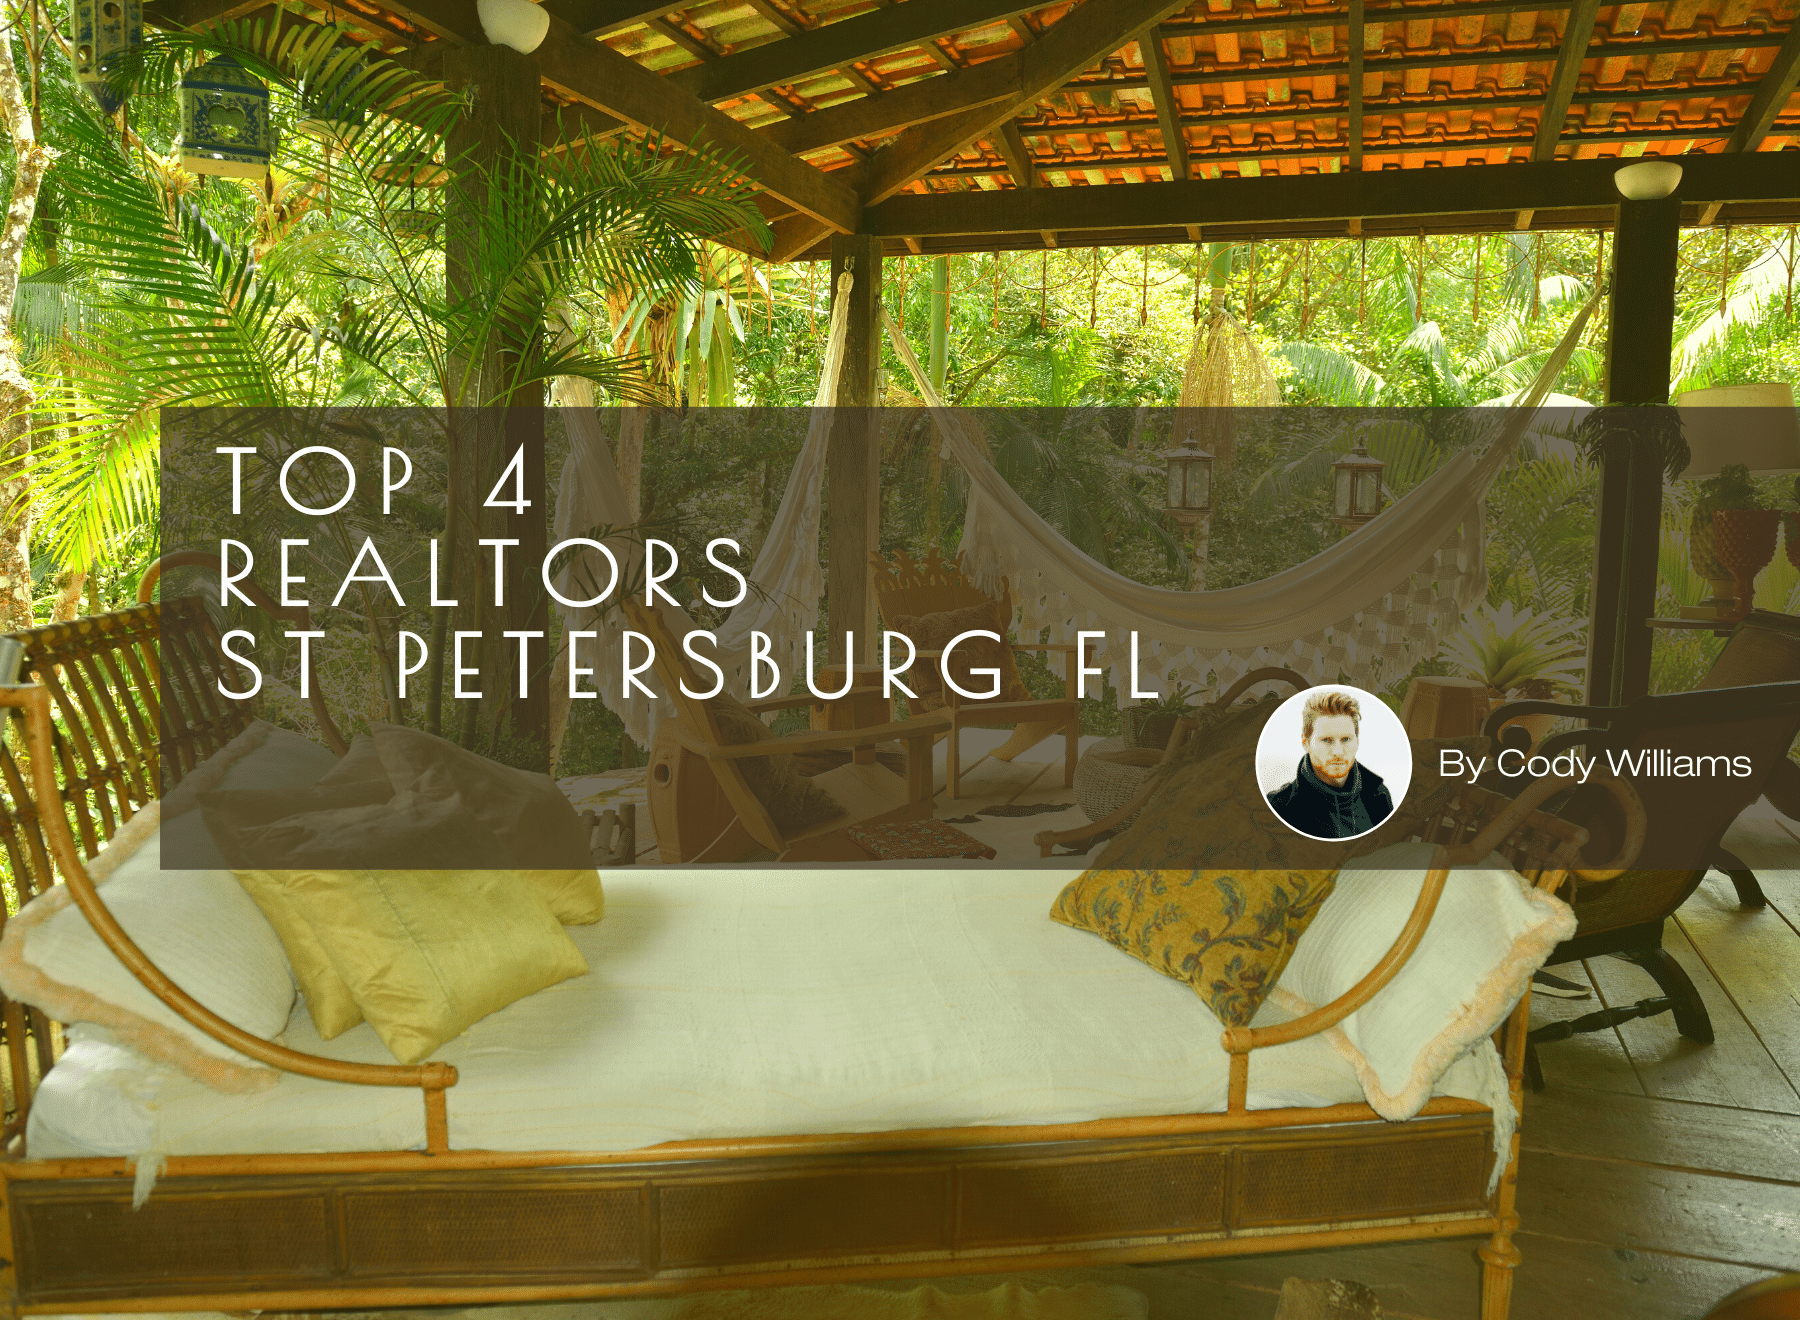 Top 4 Realtors St Petersburg FL By Cody Williams Independent Researcher